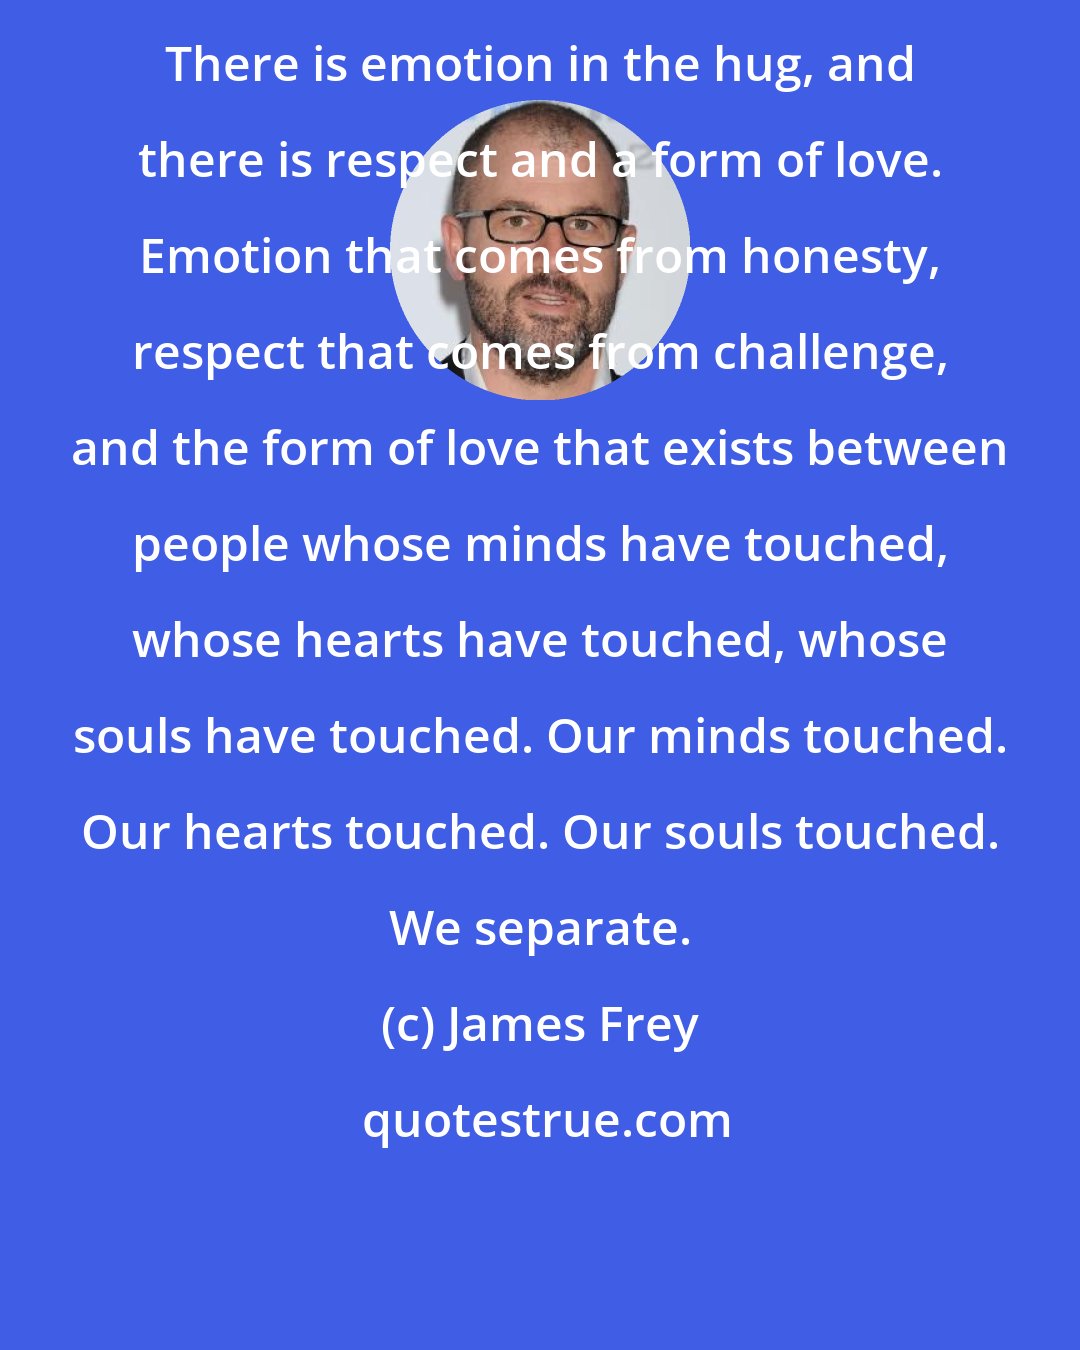 James Frey: There is emotion in the hug, and there is respect and a form of love. Emotion that comes from honesty, respect that comes from challenge, and the form of love that exists between people whose minds have touched, whose hearts have touched, whose souls have touched. Our minds touched. Our hearts touched. Our souls touched. We separate.